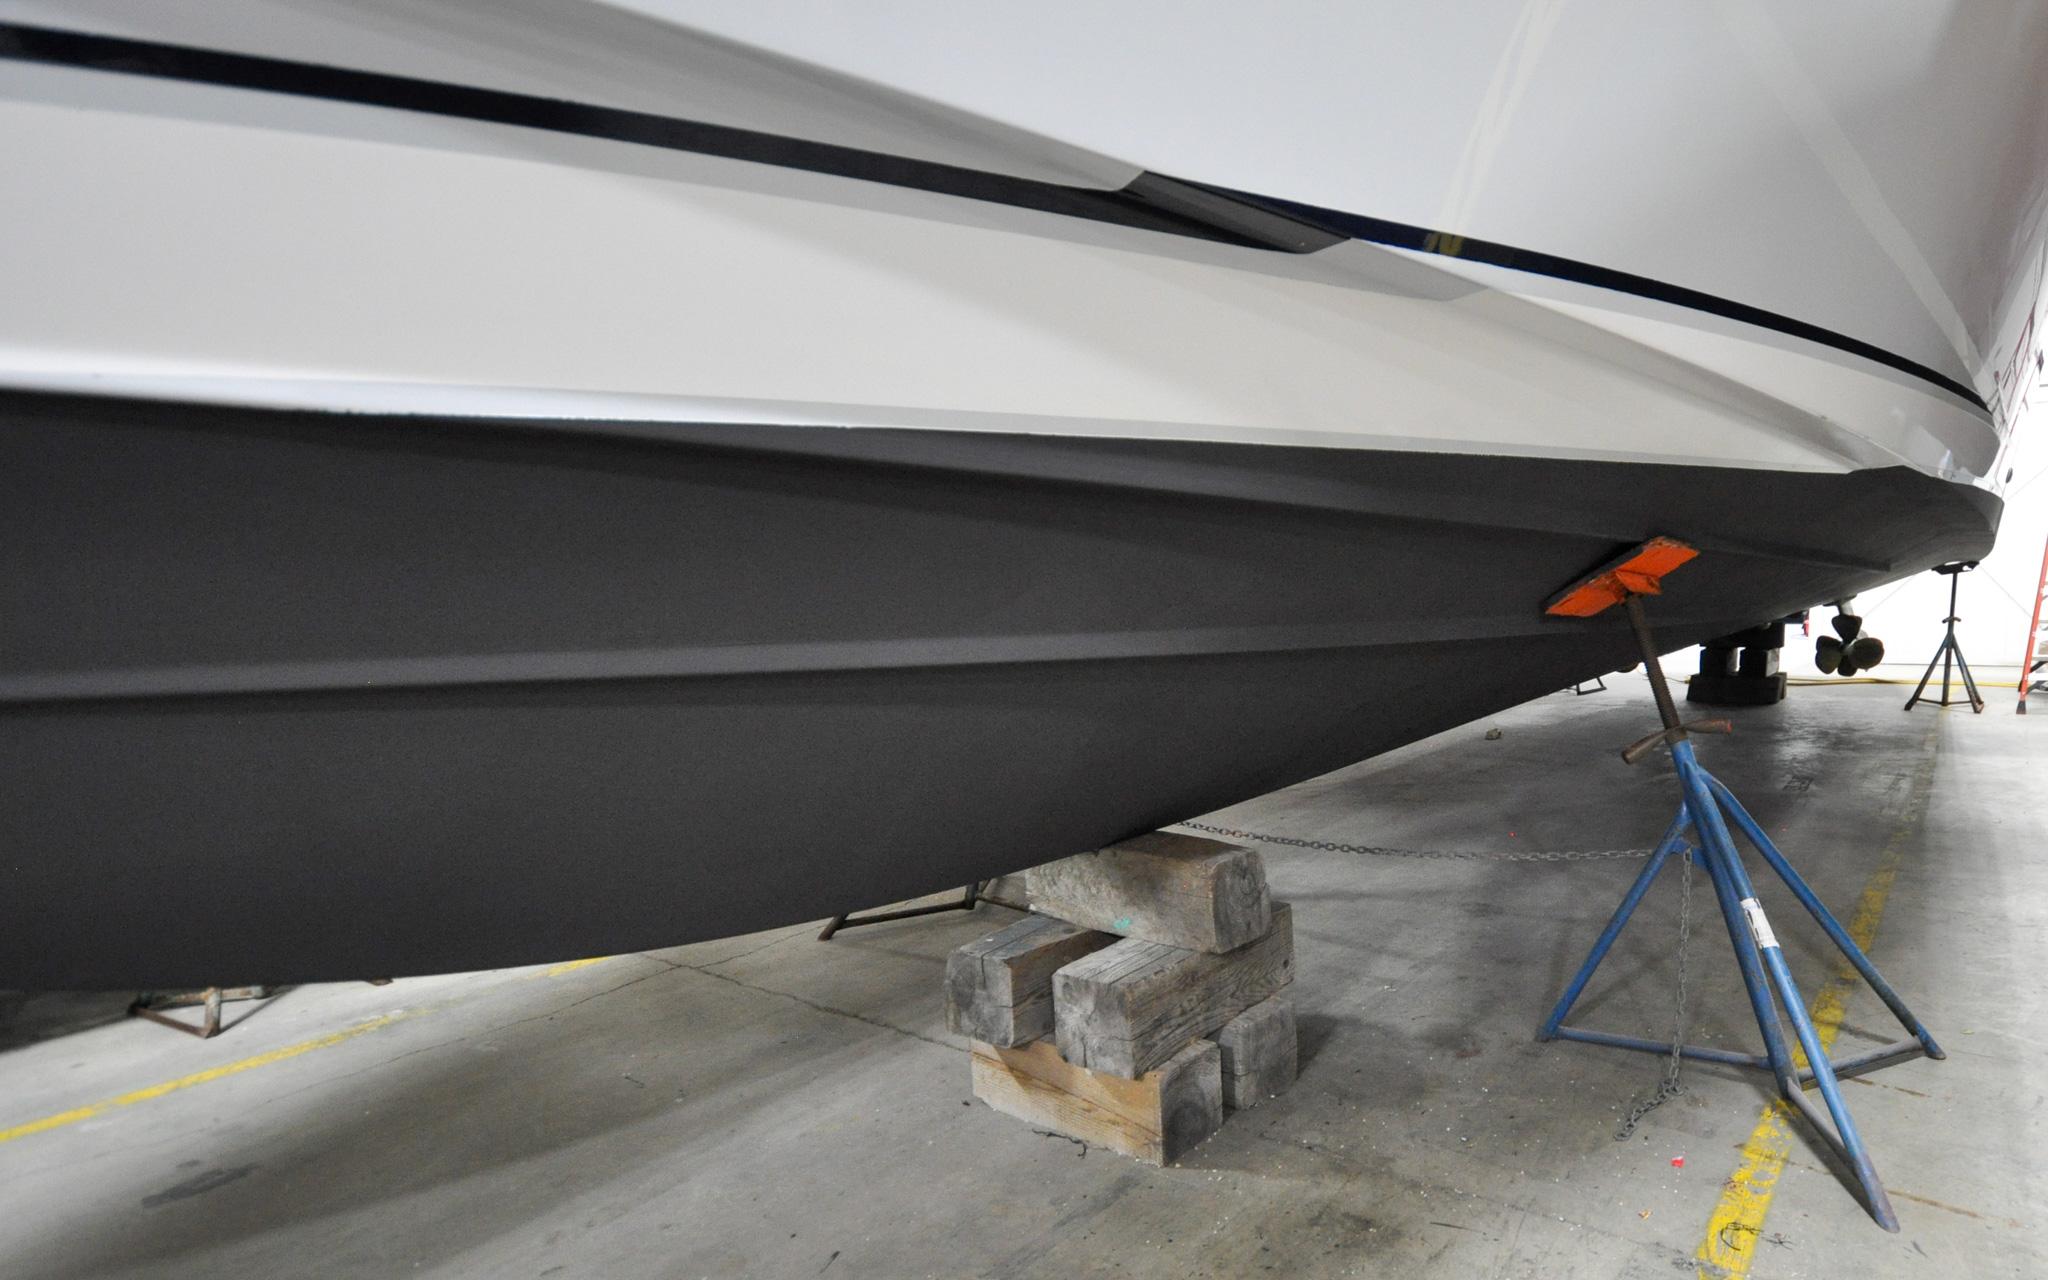 Sabre 38 Salon Express - Knot Done Yet - In Heated Storage